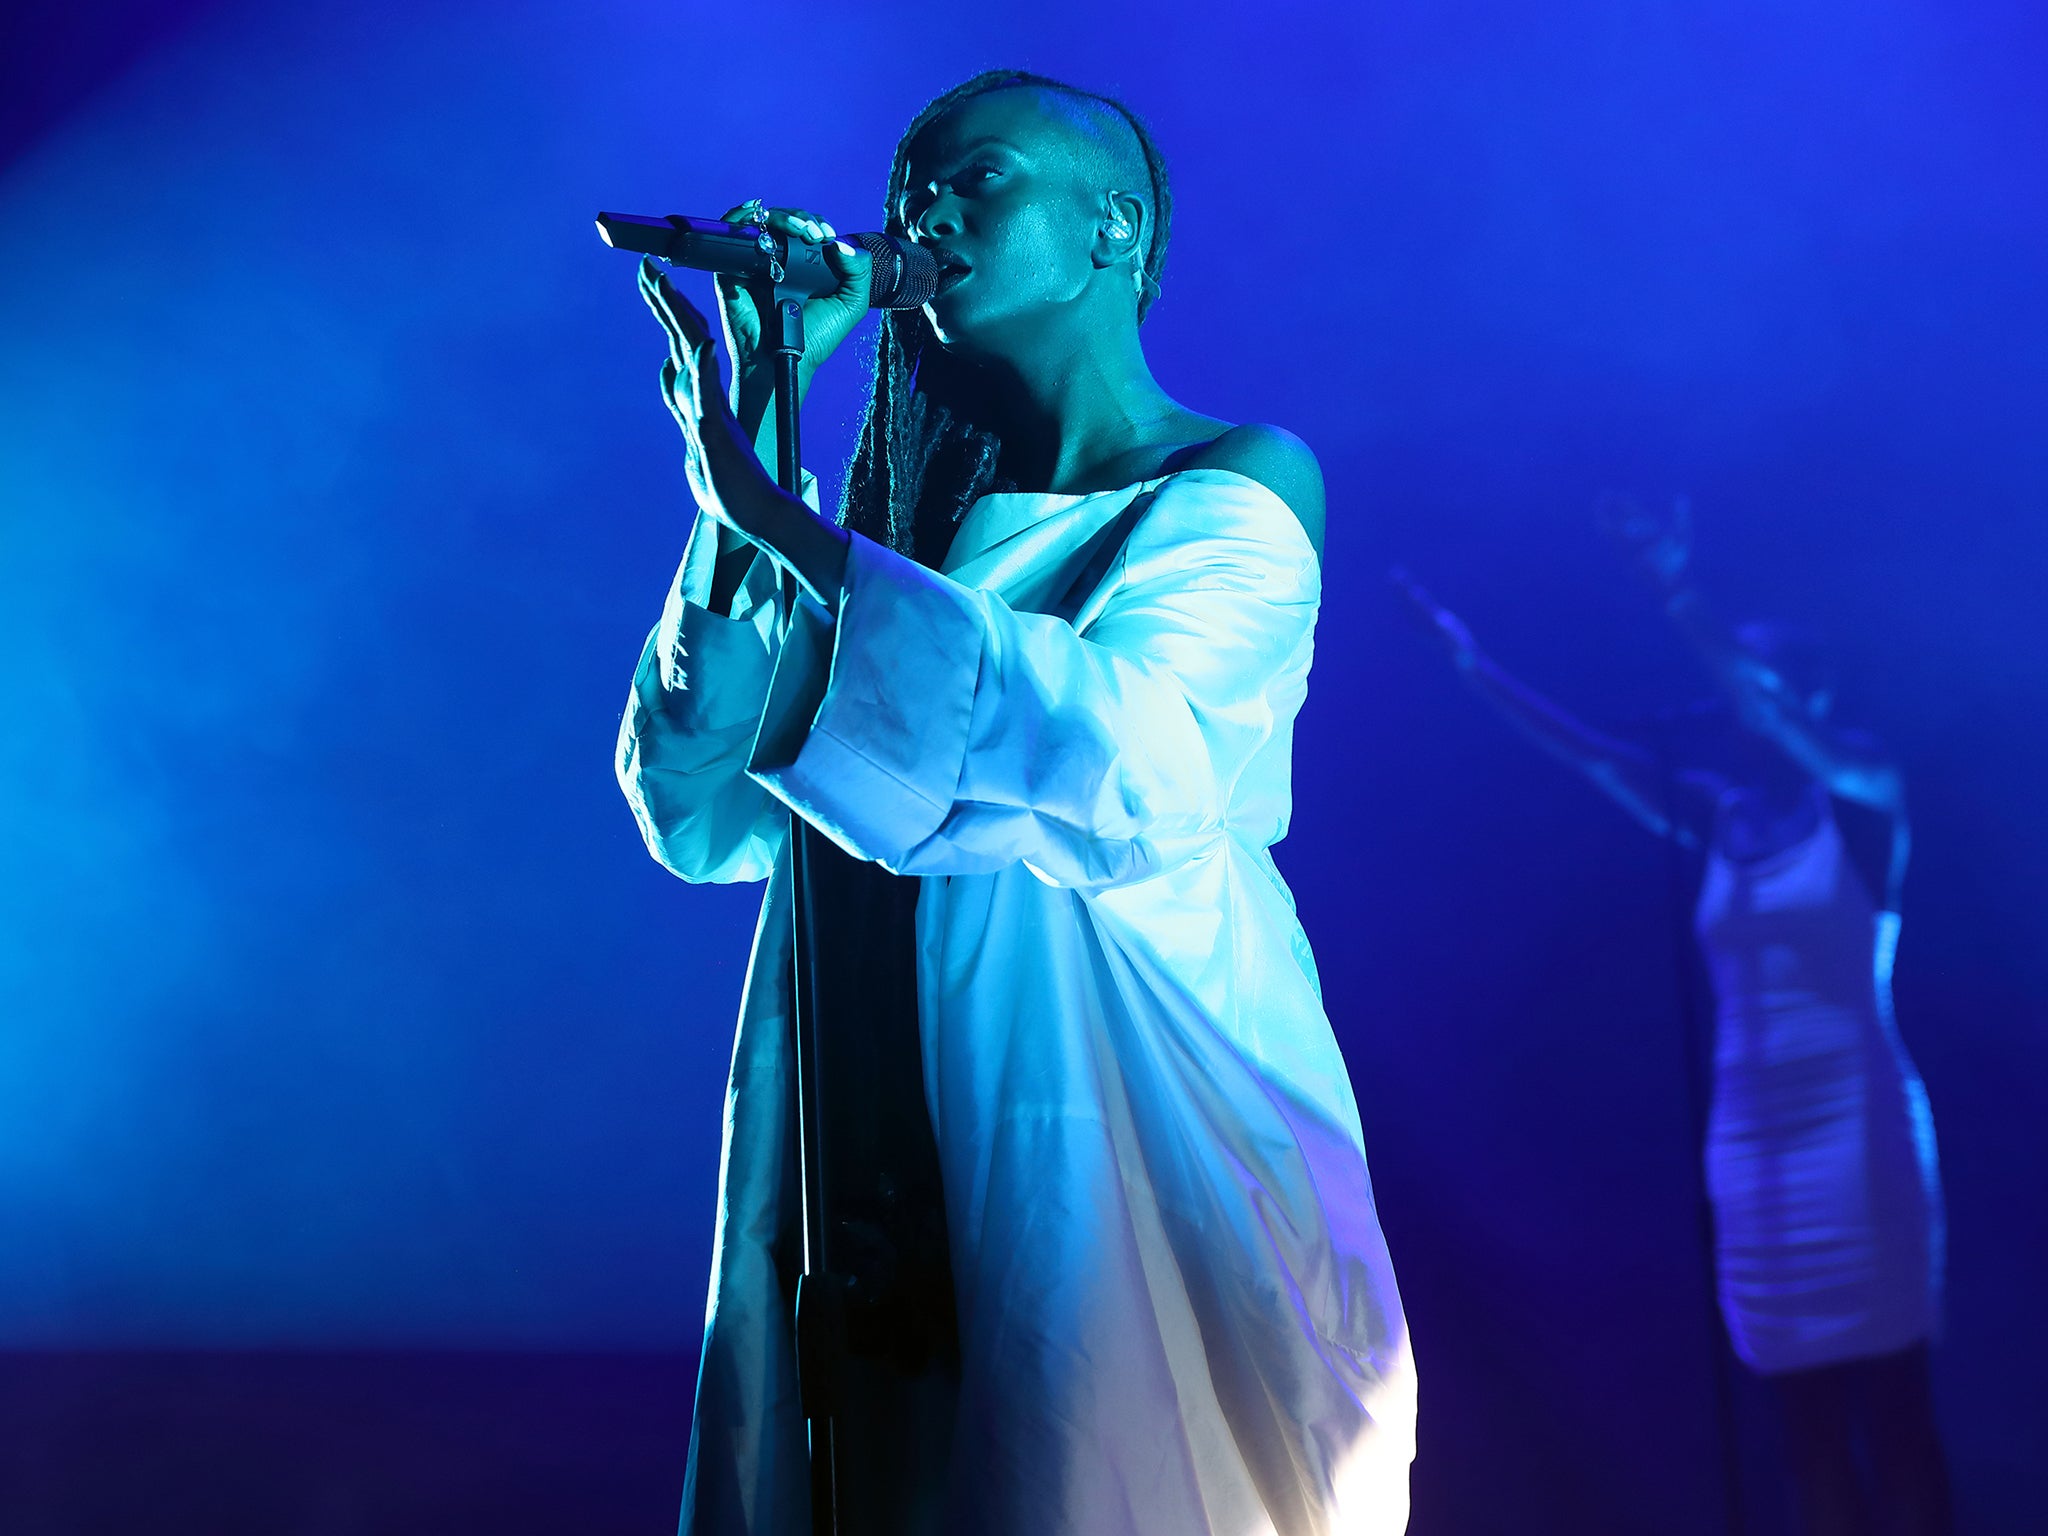 Kelela performs at The Roundhouse